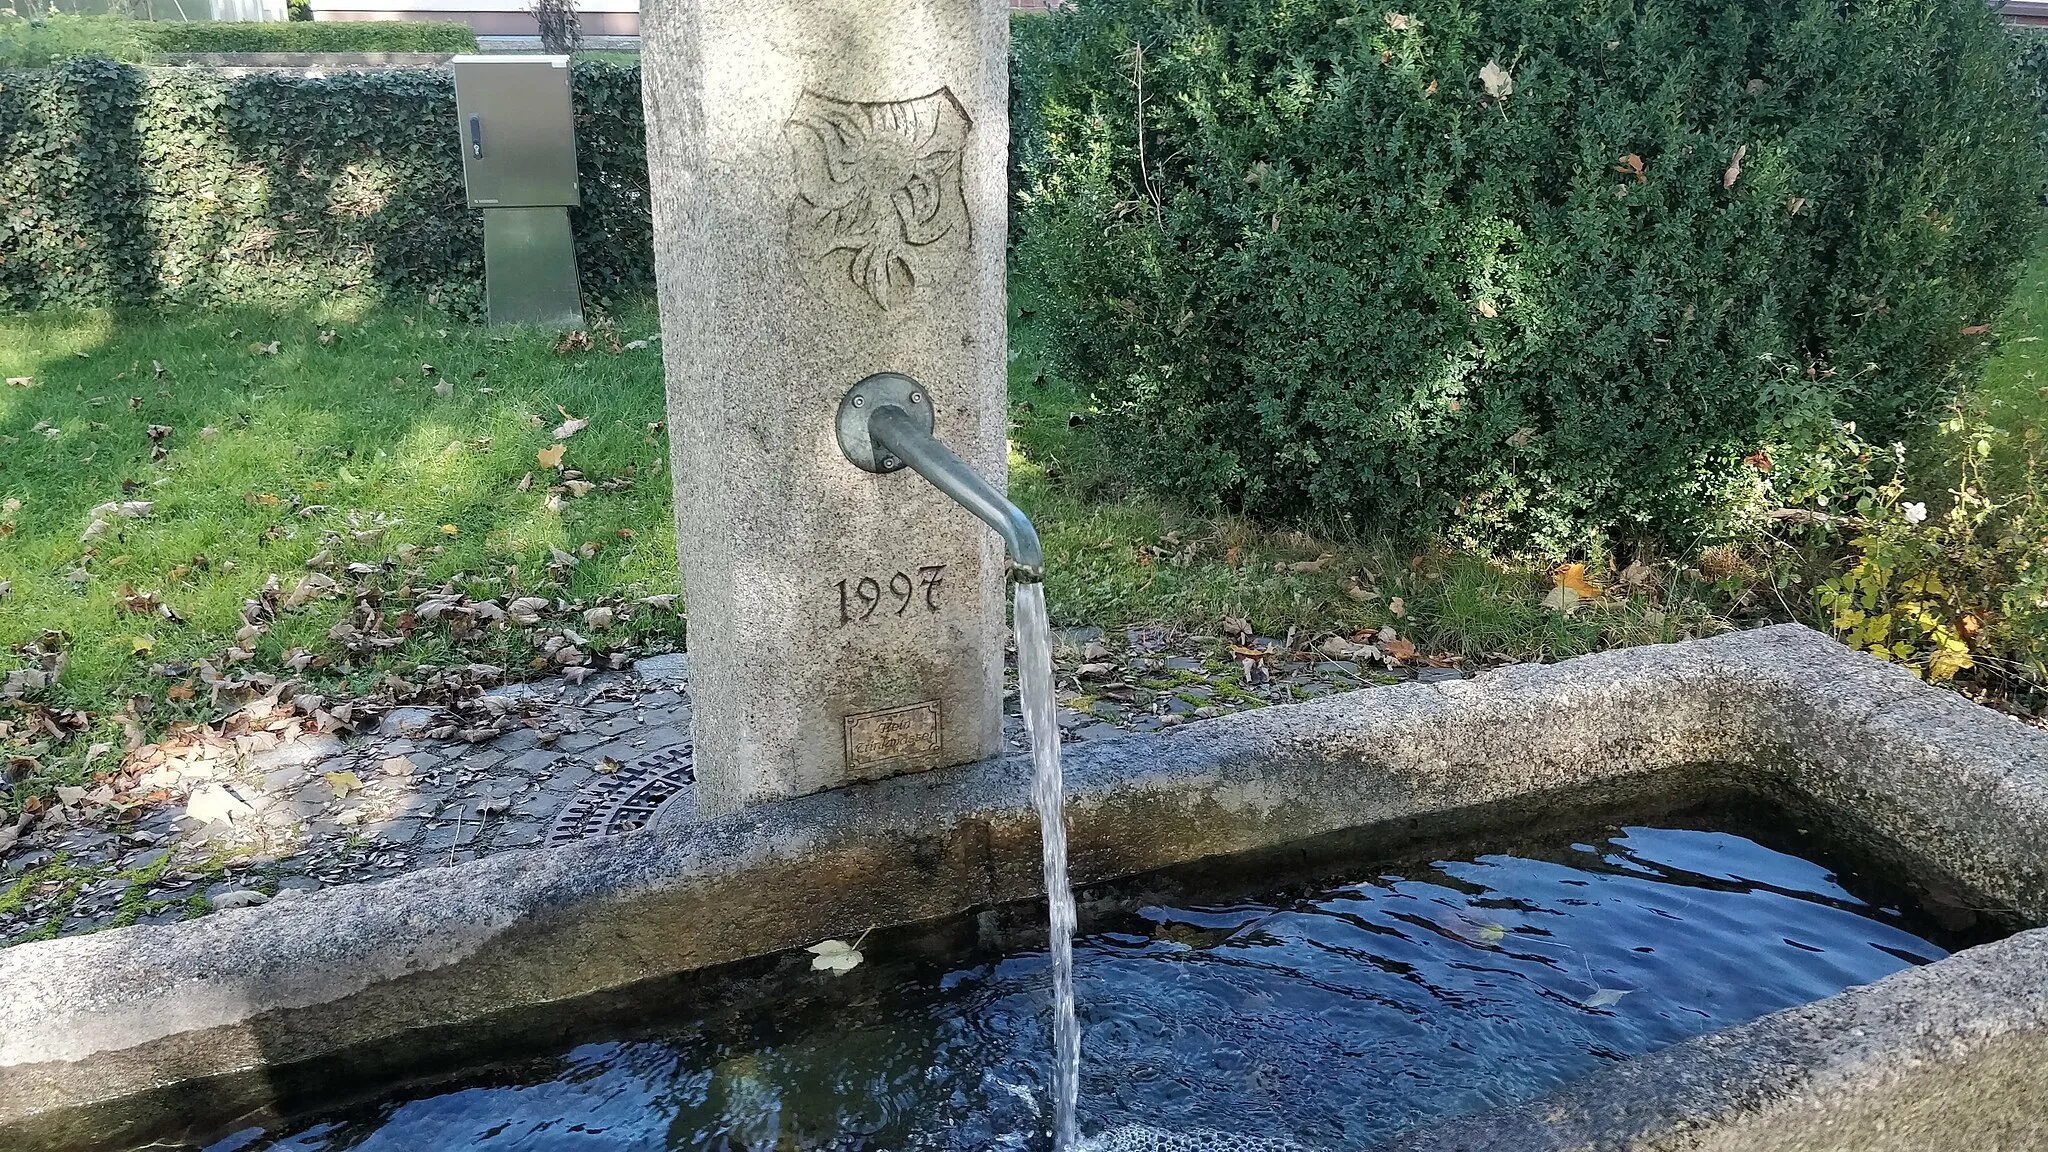 Photo showing: Fountain located in Unterbergen, near the fire department. Built 1997.